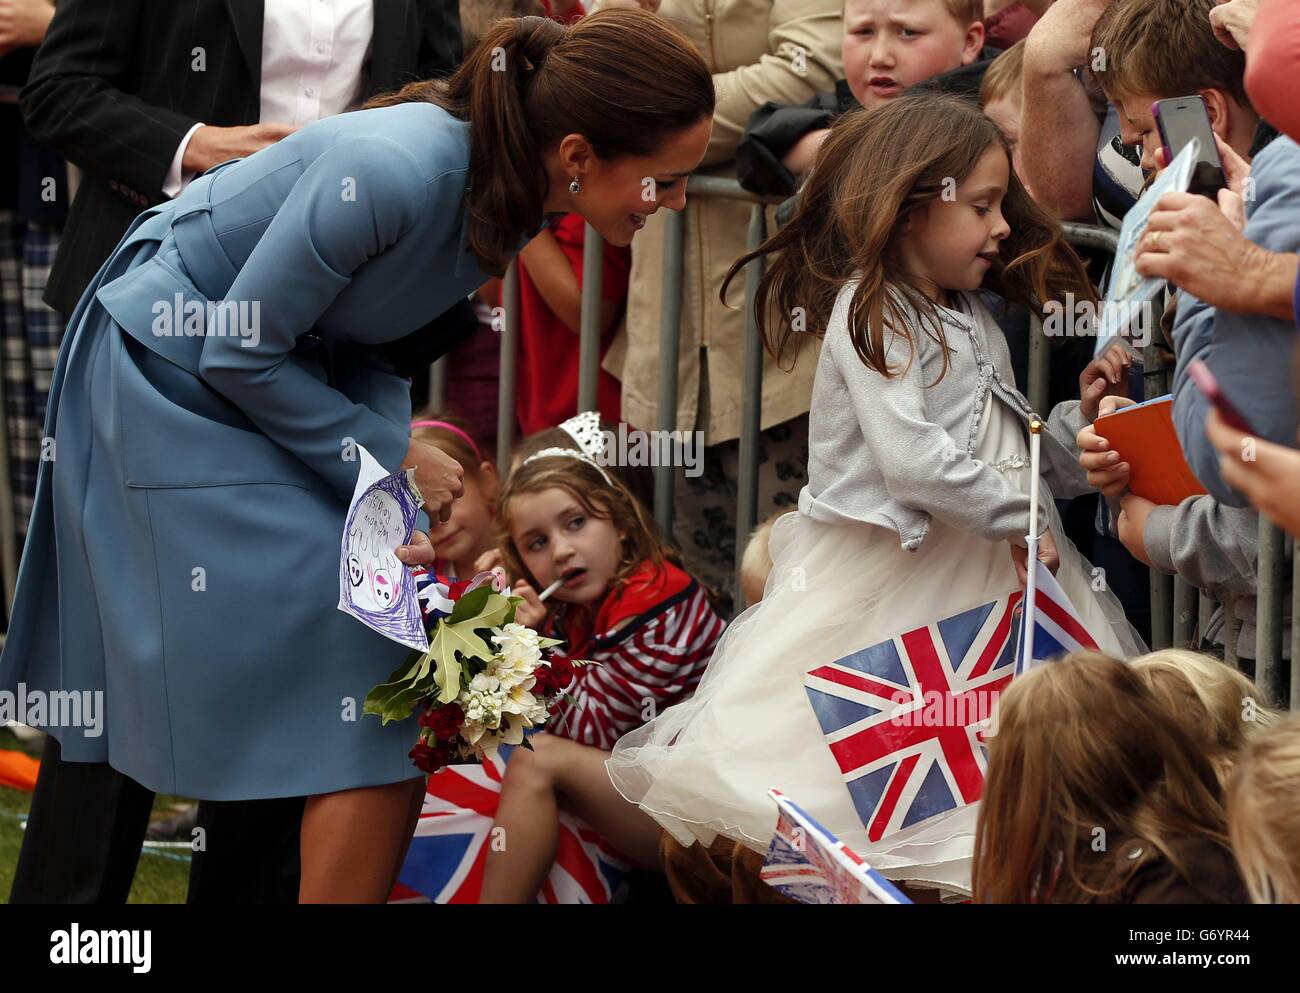 The Duchess of Cambridge, talks with children after laying a wreath at the war memorial in Seymour Square in the town of Blenheim in New Zealand. The royal couple are undertaking a 19-day official visit to New Zealand and Australia with their son George. Stock Photo